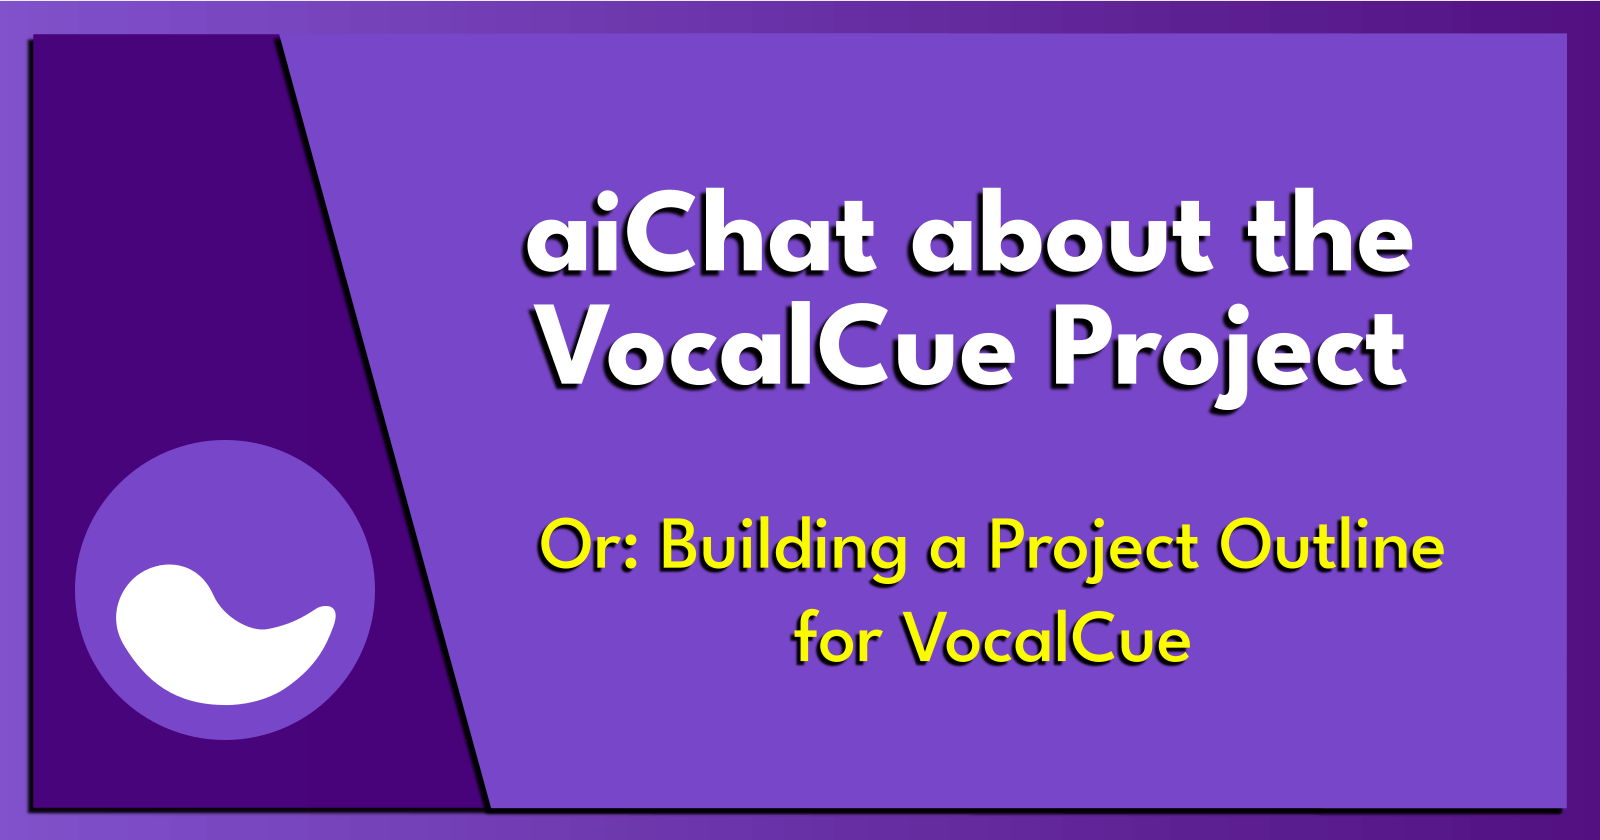 aiChat about the VocalCue Project.